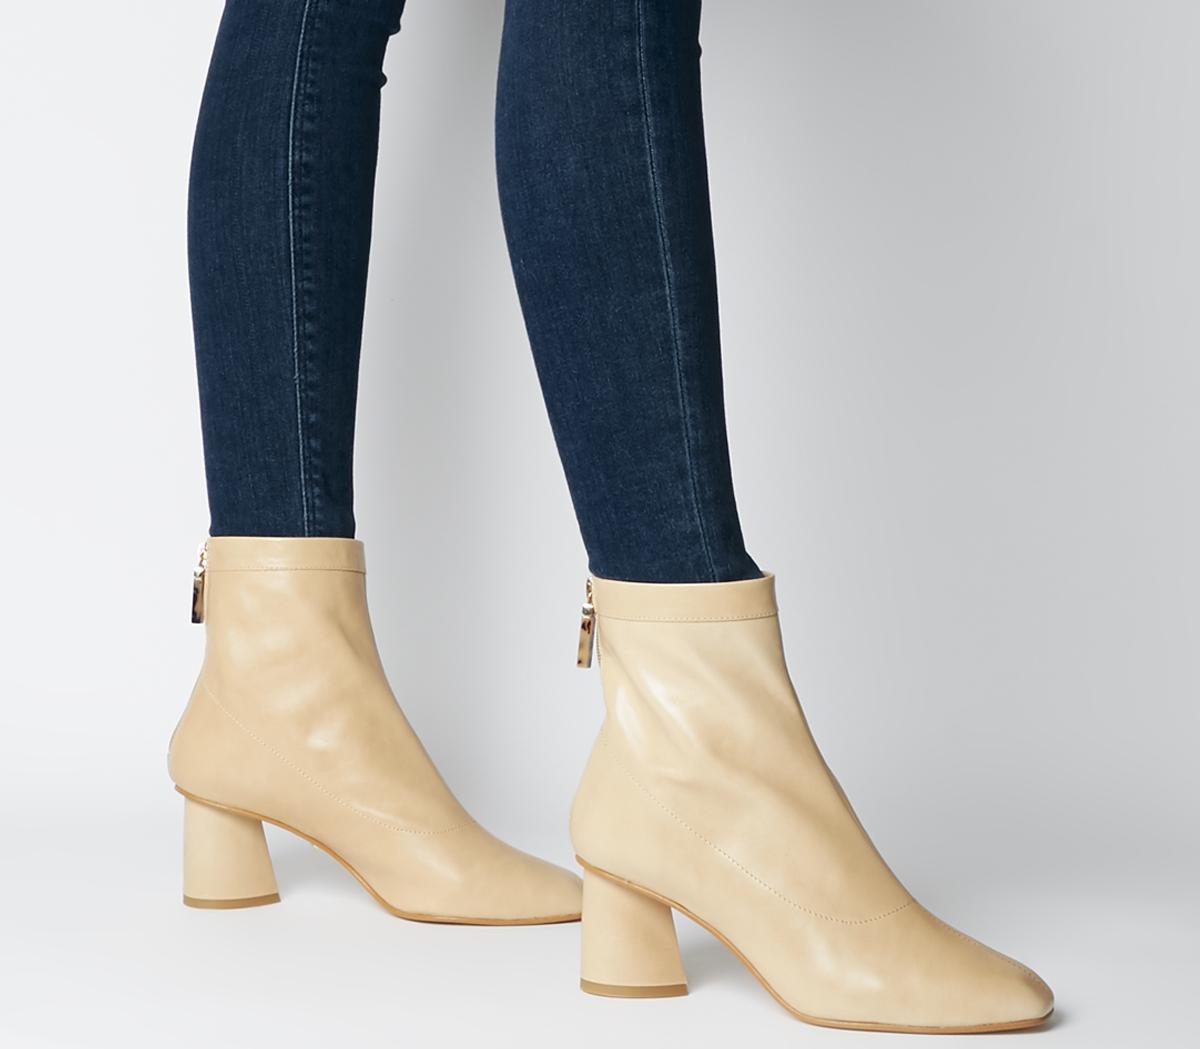 camel leather knee high boots